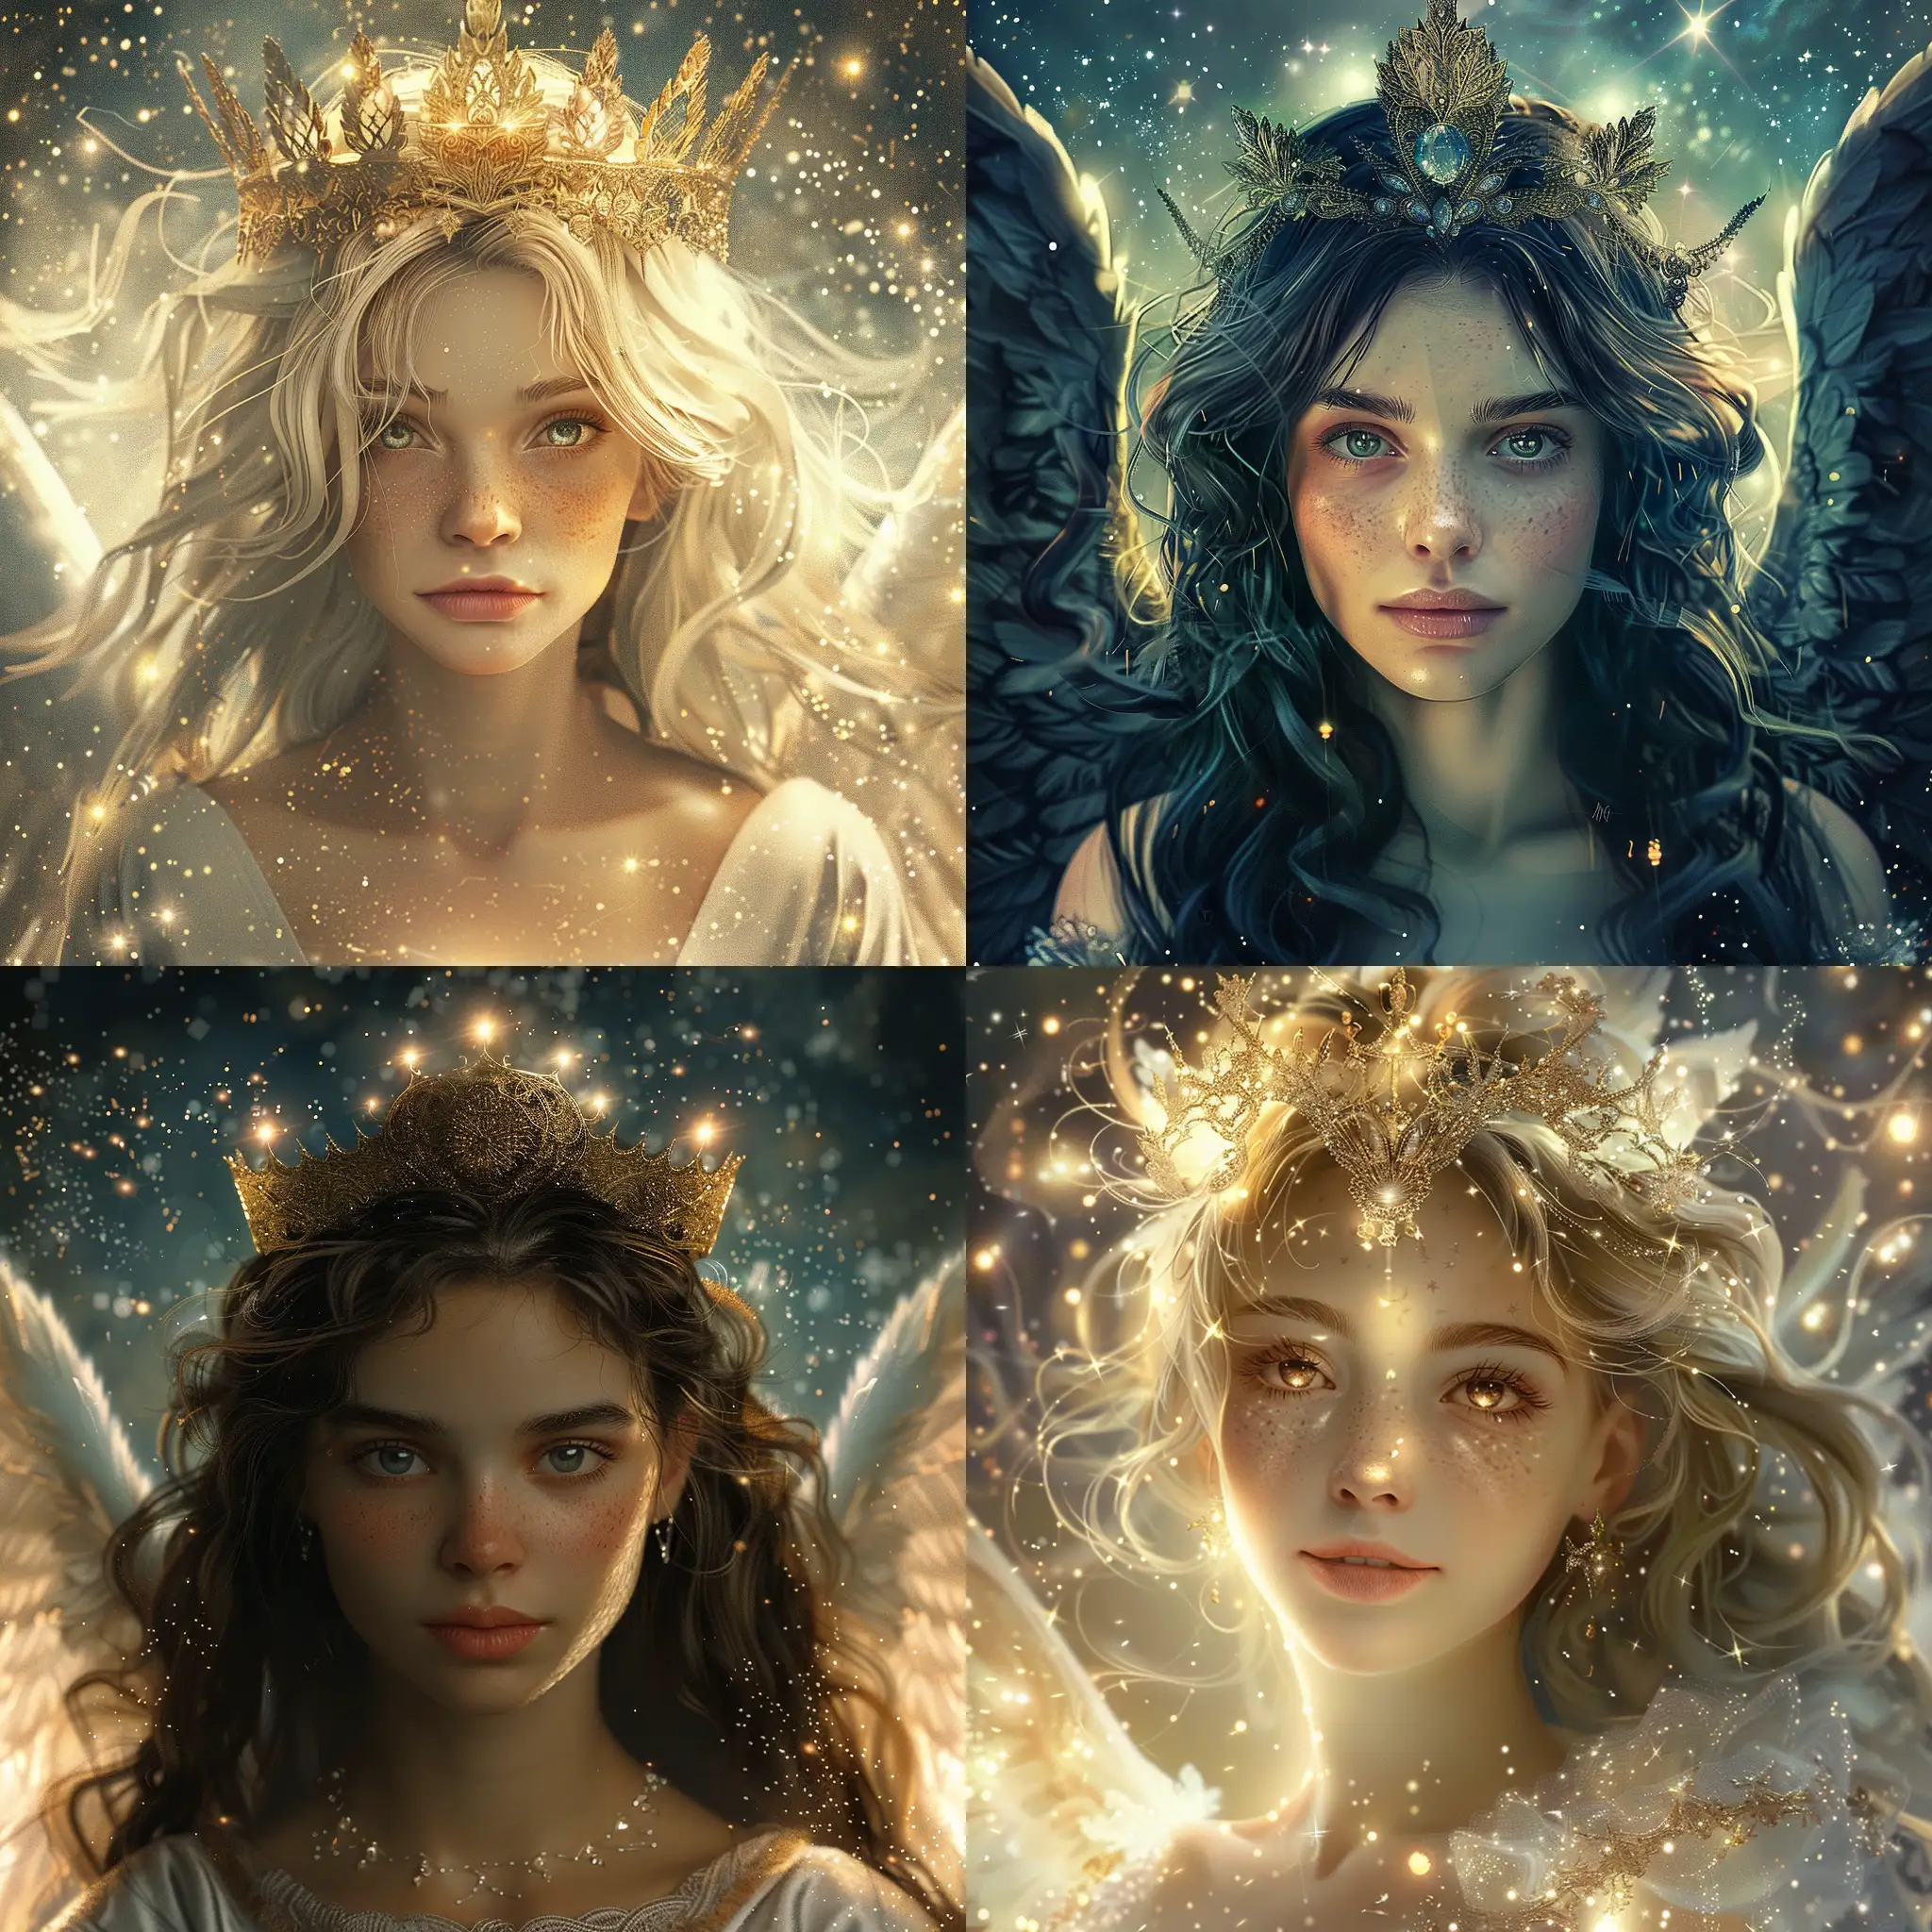 Medieval-Angel-with-Kind-Eyes-and-Crown-of-Pure-Light-in-a-Starlit-Fantasy-Realm